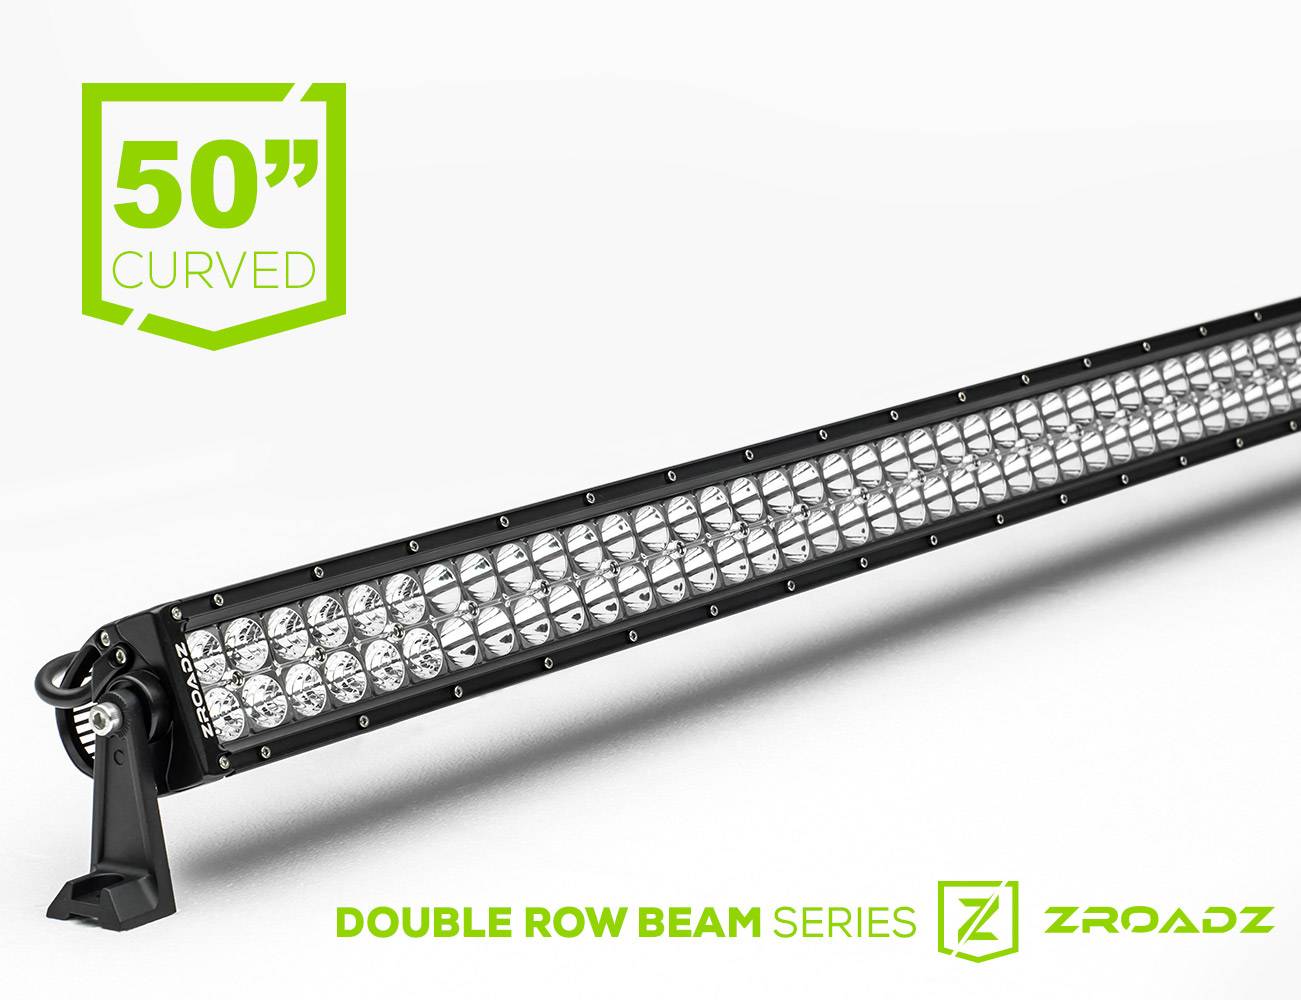 ZROADZ OFF ROAD PRODUCTS - 50 Inch LED Curved Double Row Light Bar - PN #Z30CBC14W288